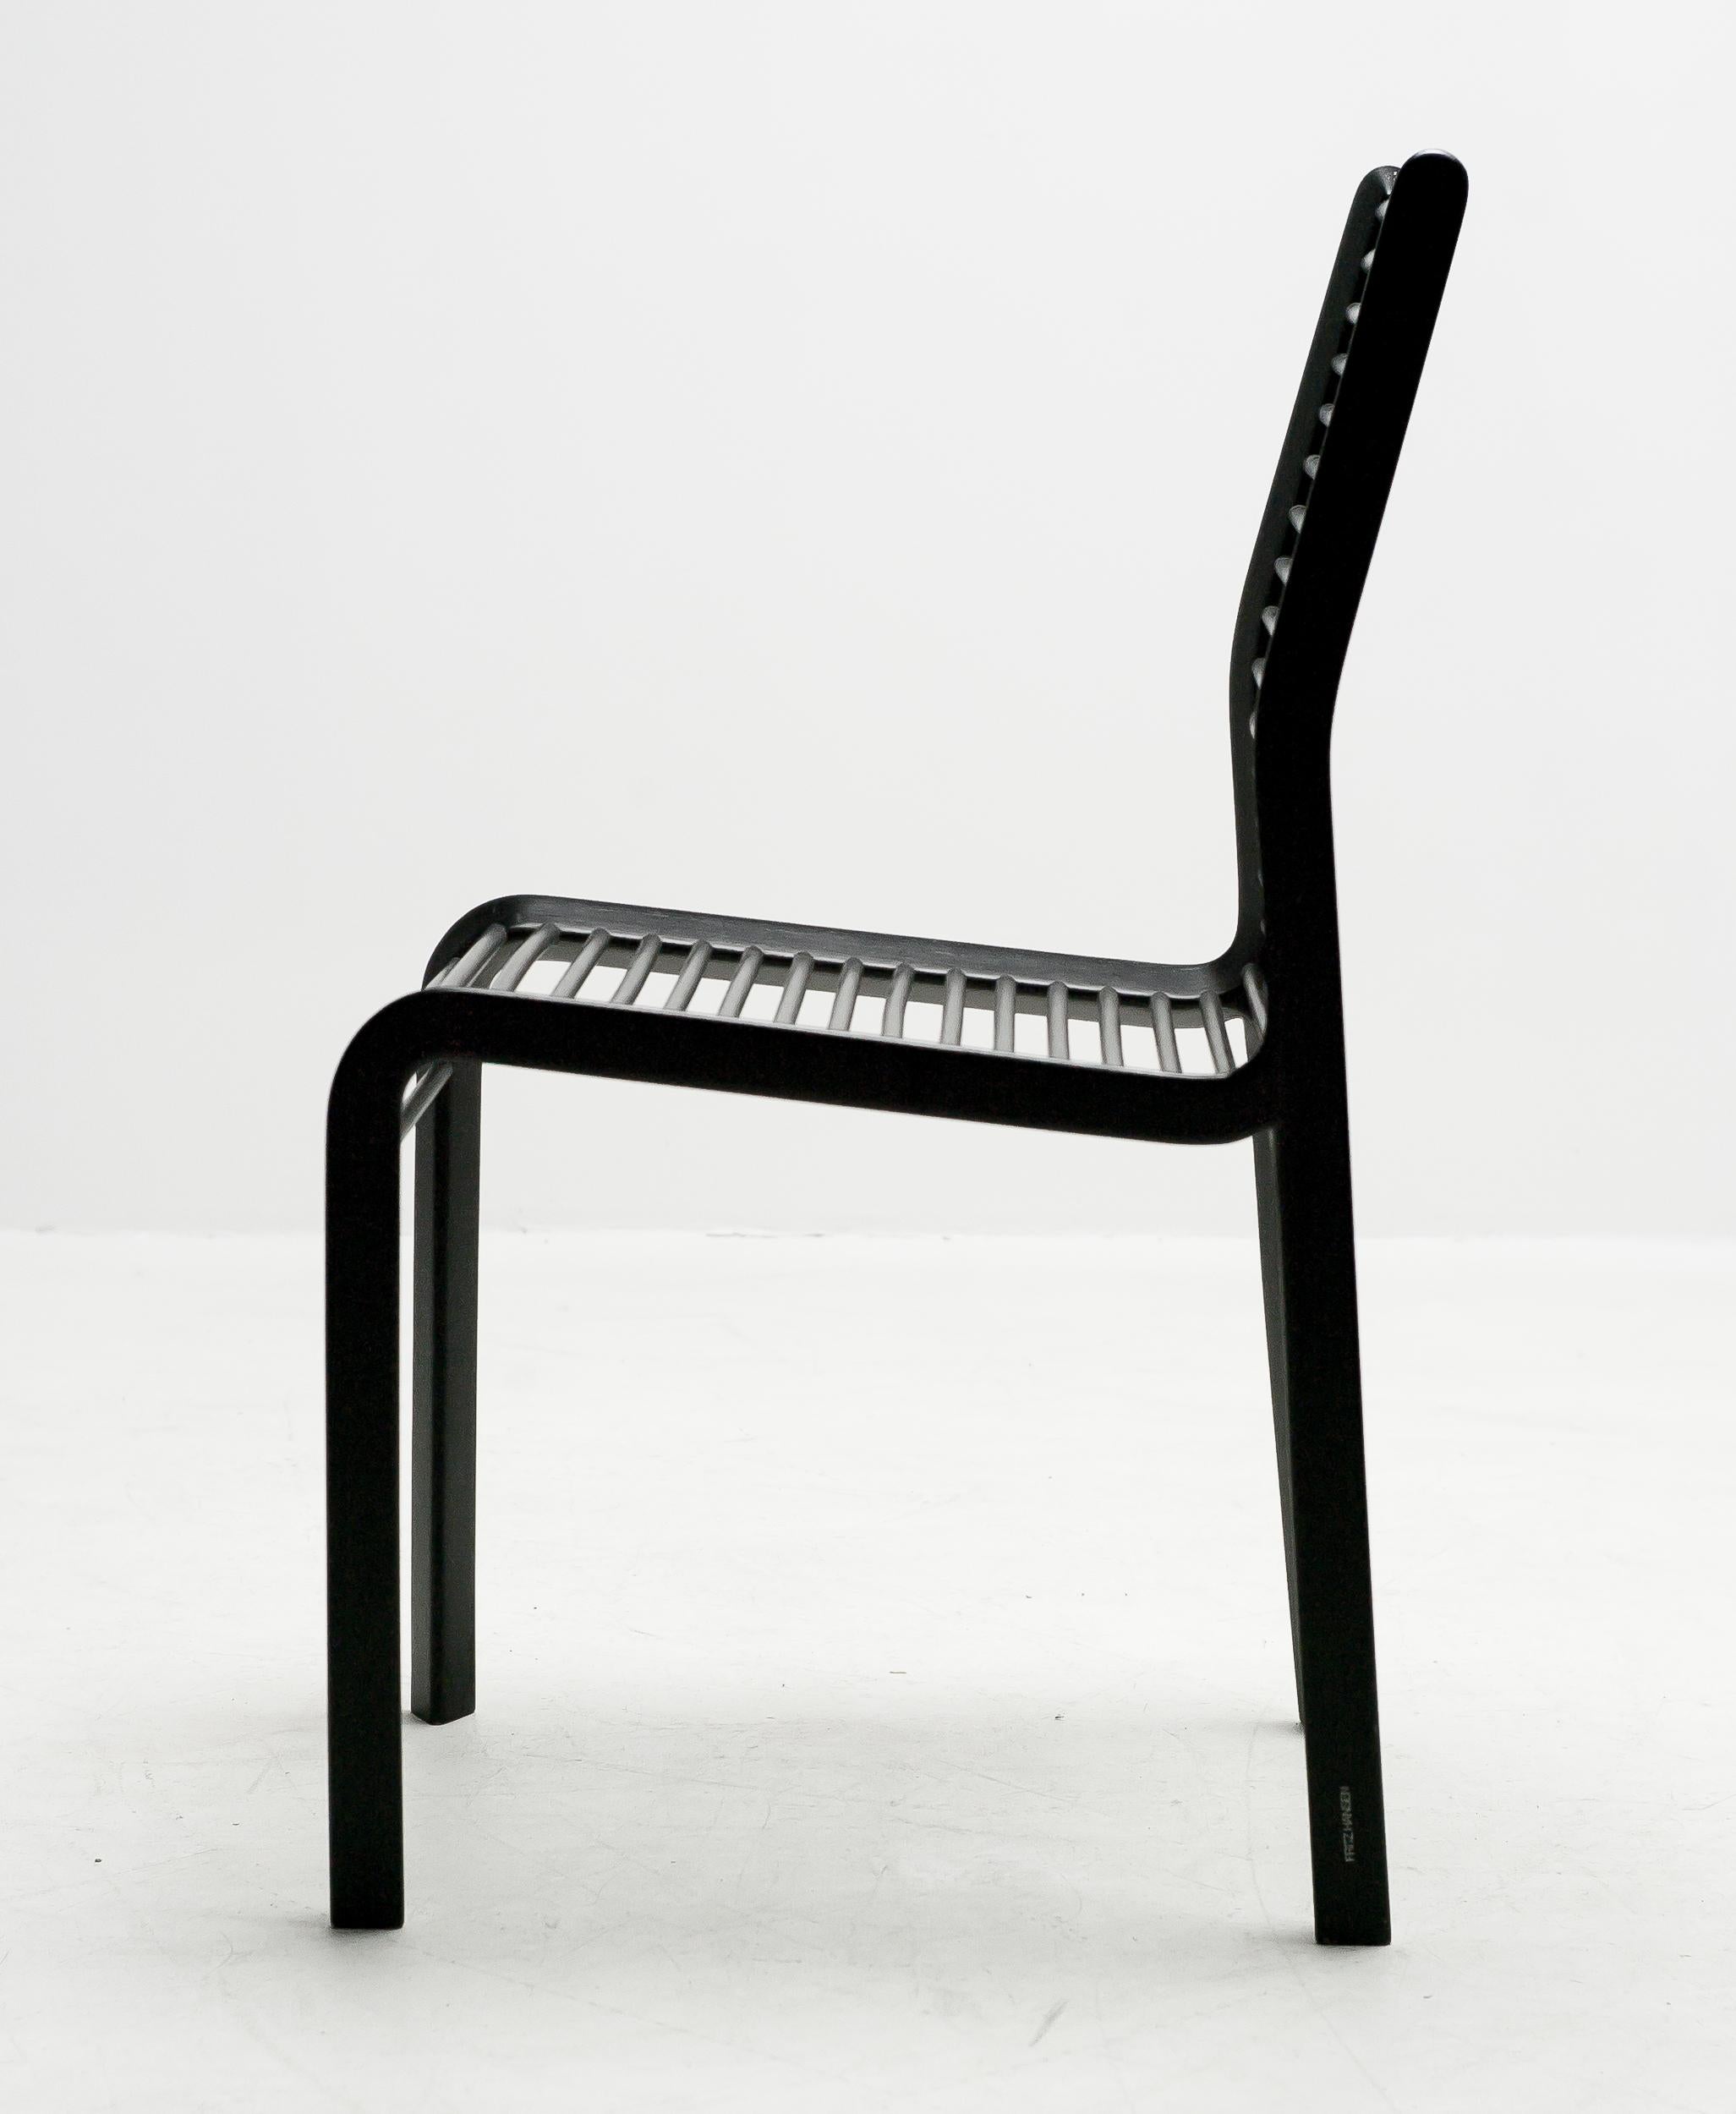 The exceptional Delta chair was designed in 1983 and the result of the first collaboration between Burkhard Vogtherr en Fritz Hansen. This remarkable black lacquered wooden chair is made in a limited edition, only 100 copies were made. Marked at the